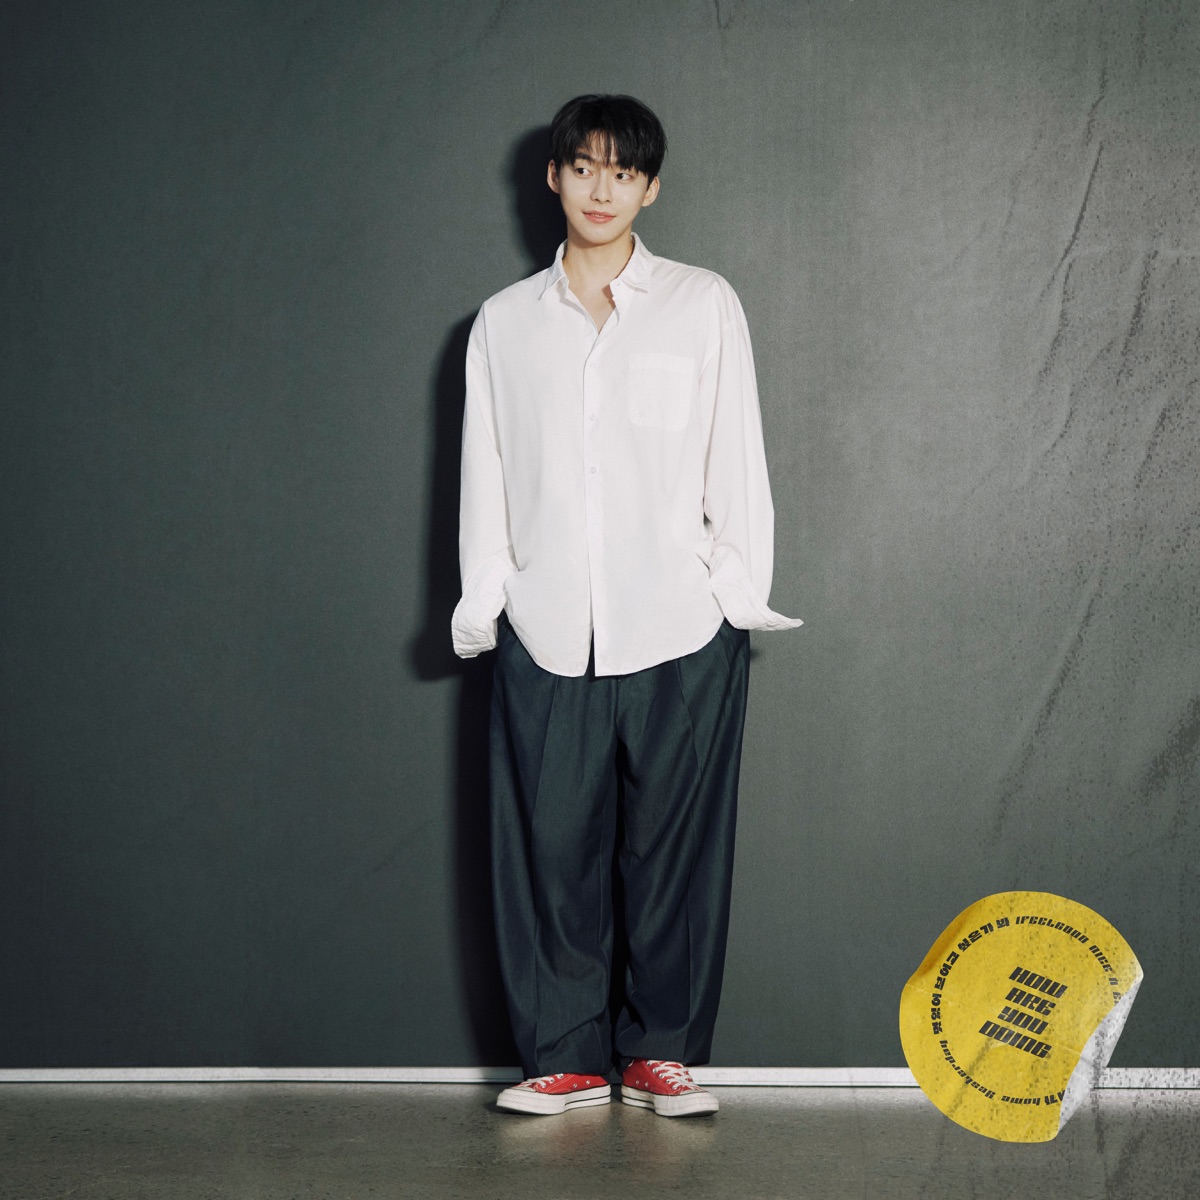 WOO JIN YOUNG – How are you doing? – EP